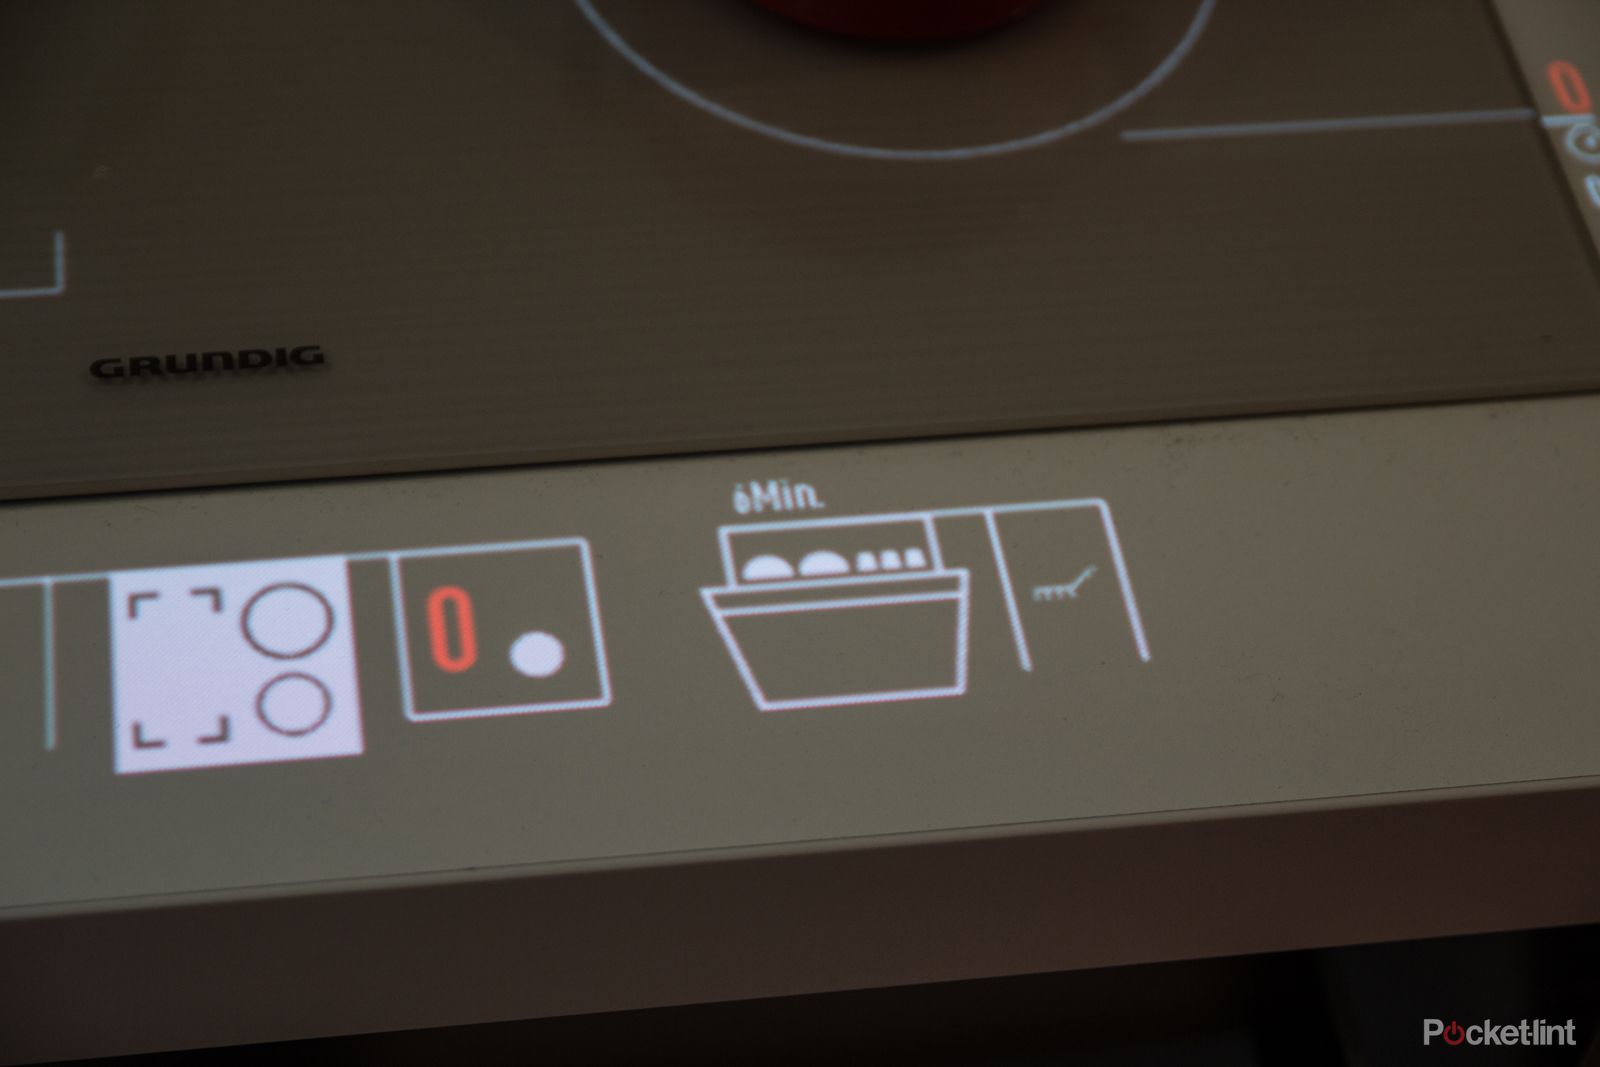 grundig vux is the smart kitchen of the future image 9